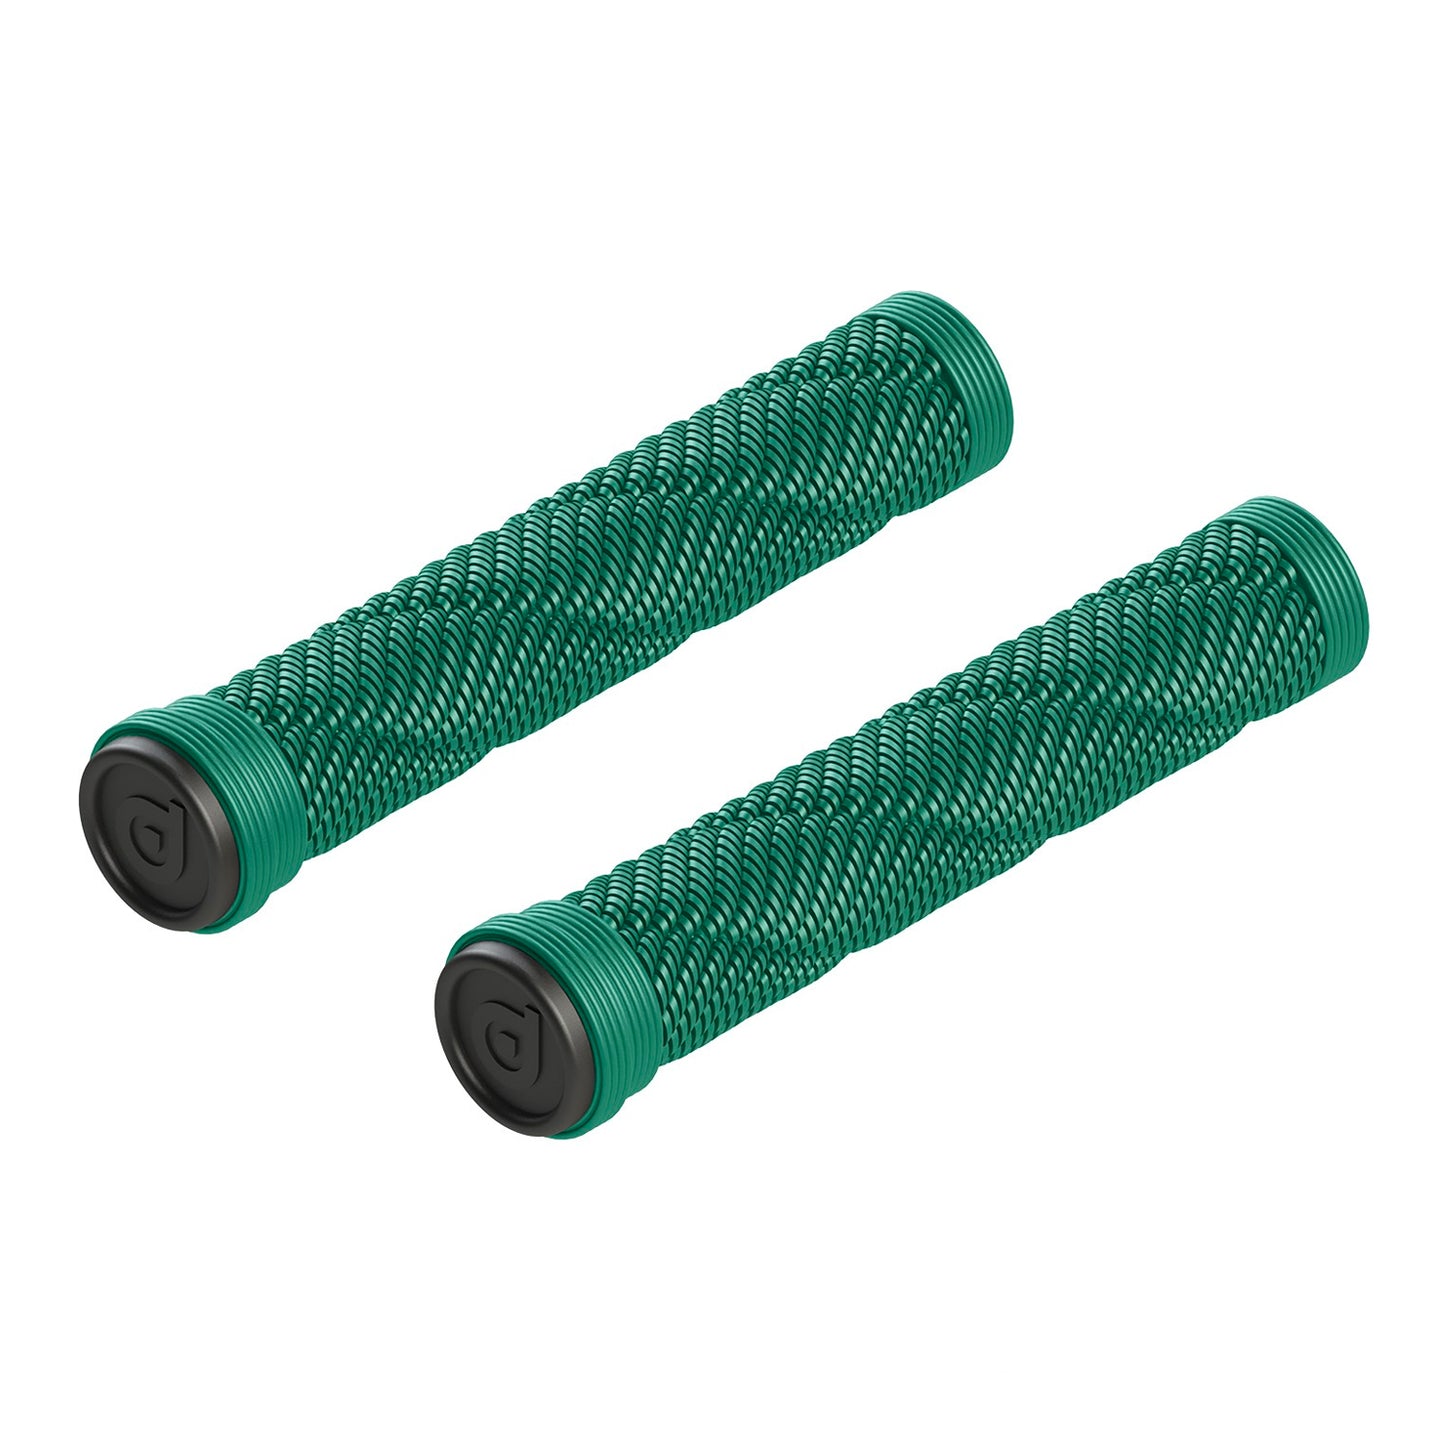 District Rope Grips - Green - Prime Delux Store